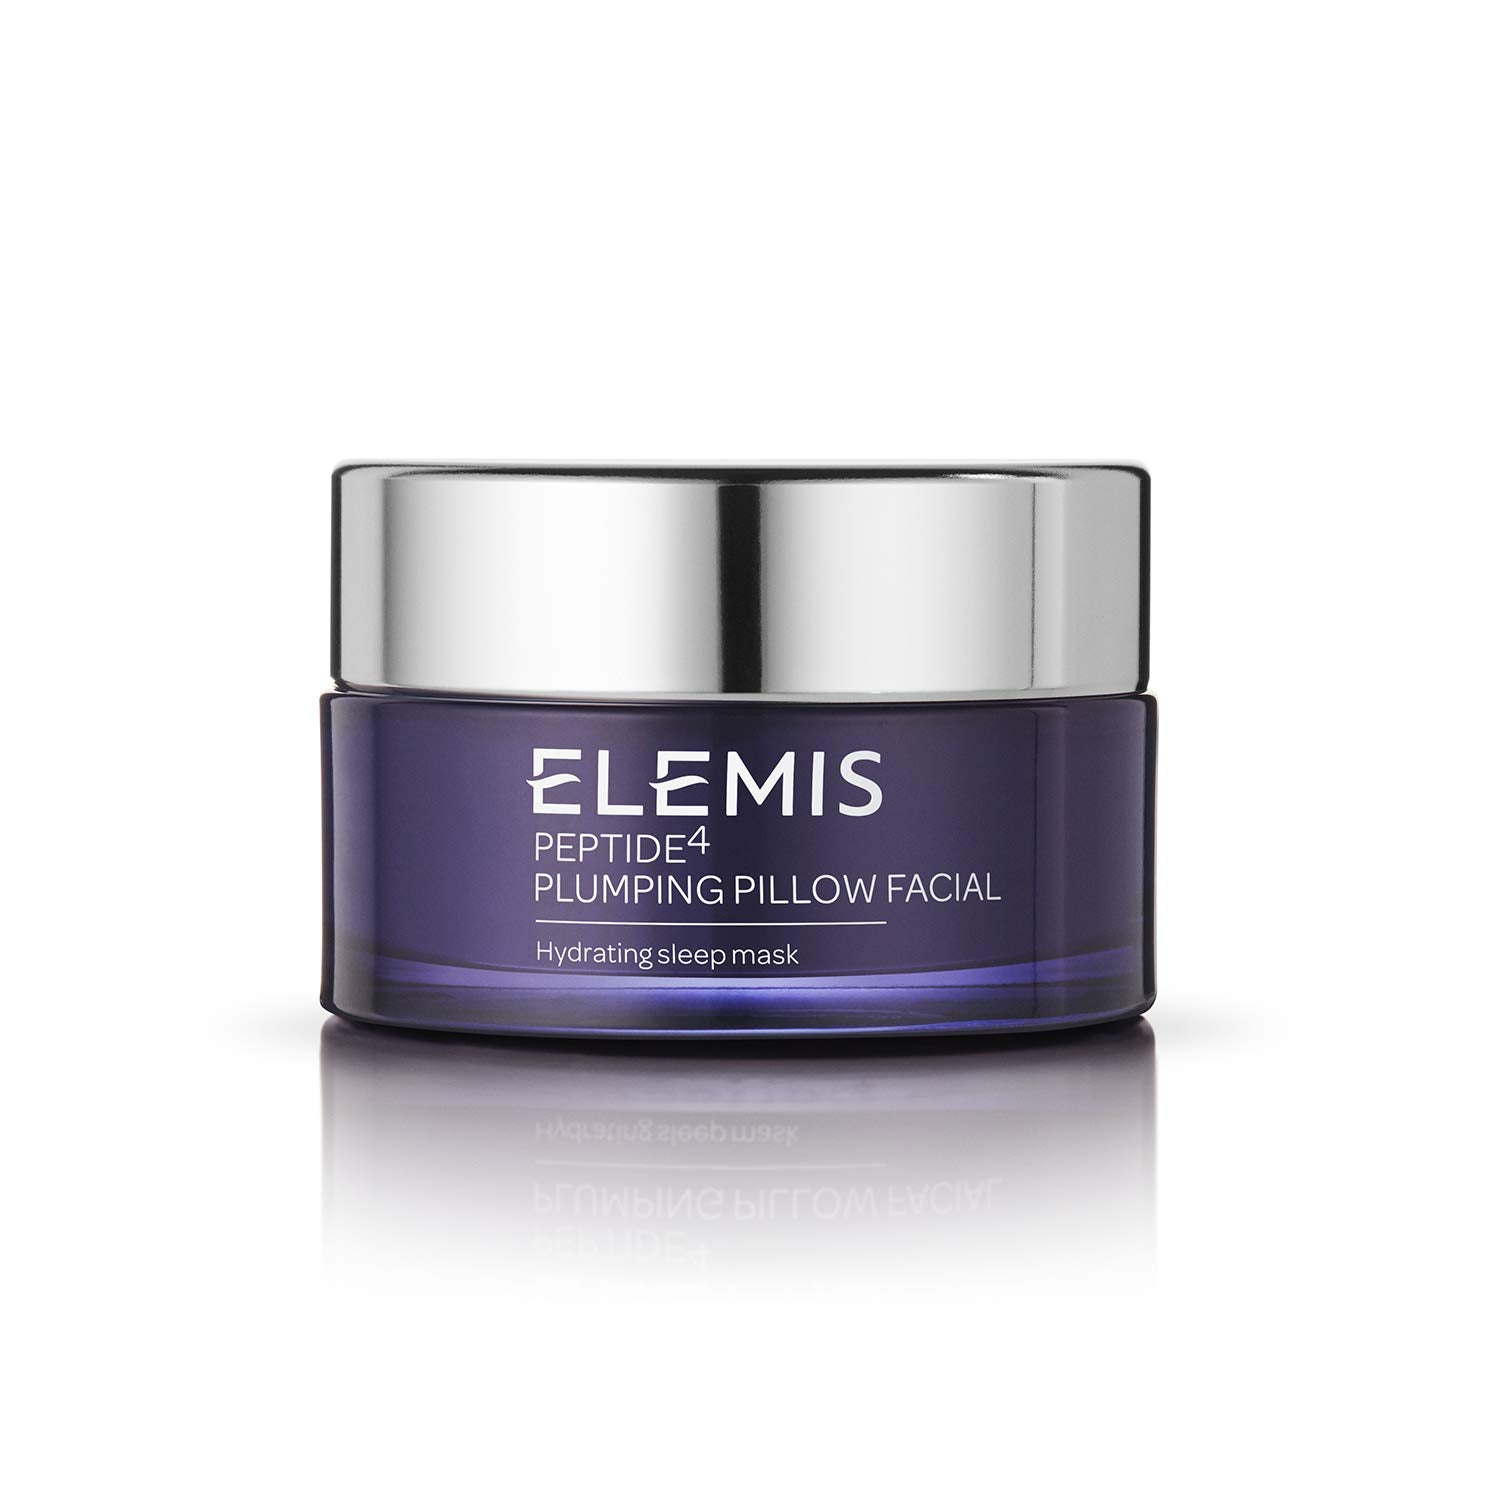 Elemis Peptide4 Plumping Pillow Facial, Cooling Gel Face Mask to Plump, Replenish and Rehydrate, Overnight Mask to Fight Tired, Dull Skin, Night Serum for a Radiant, Refreshed Complexion, 50 ml